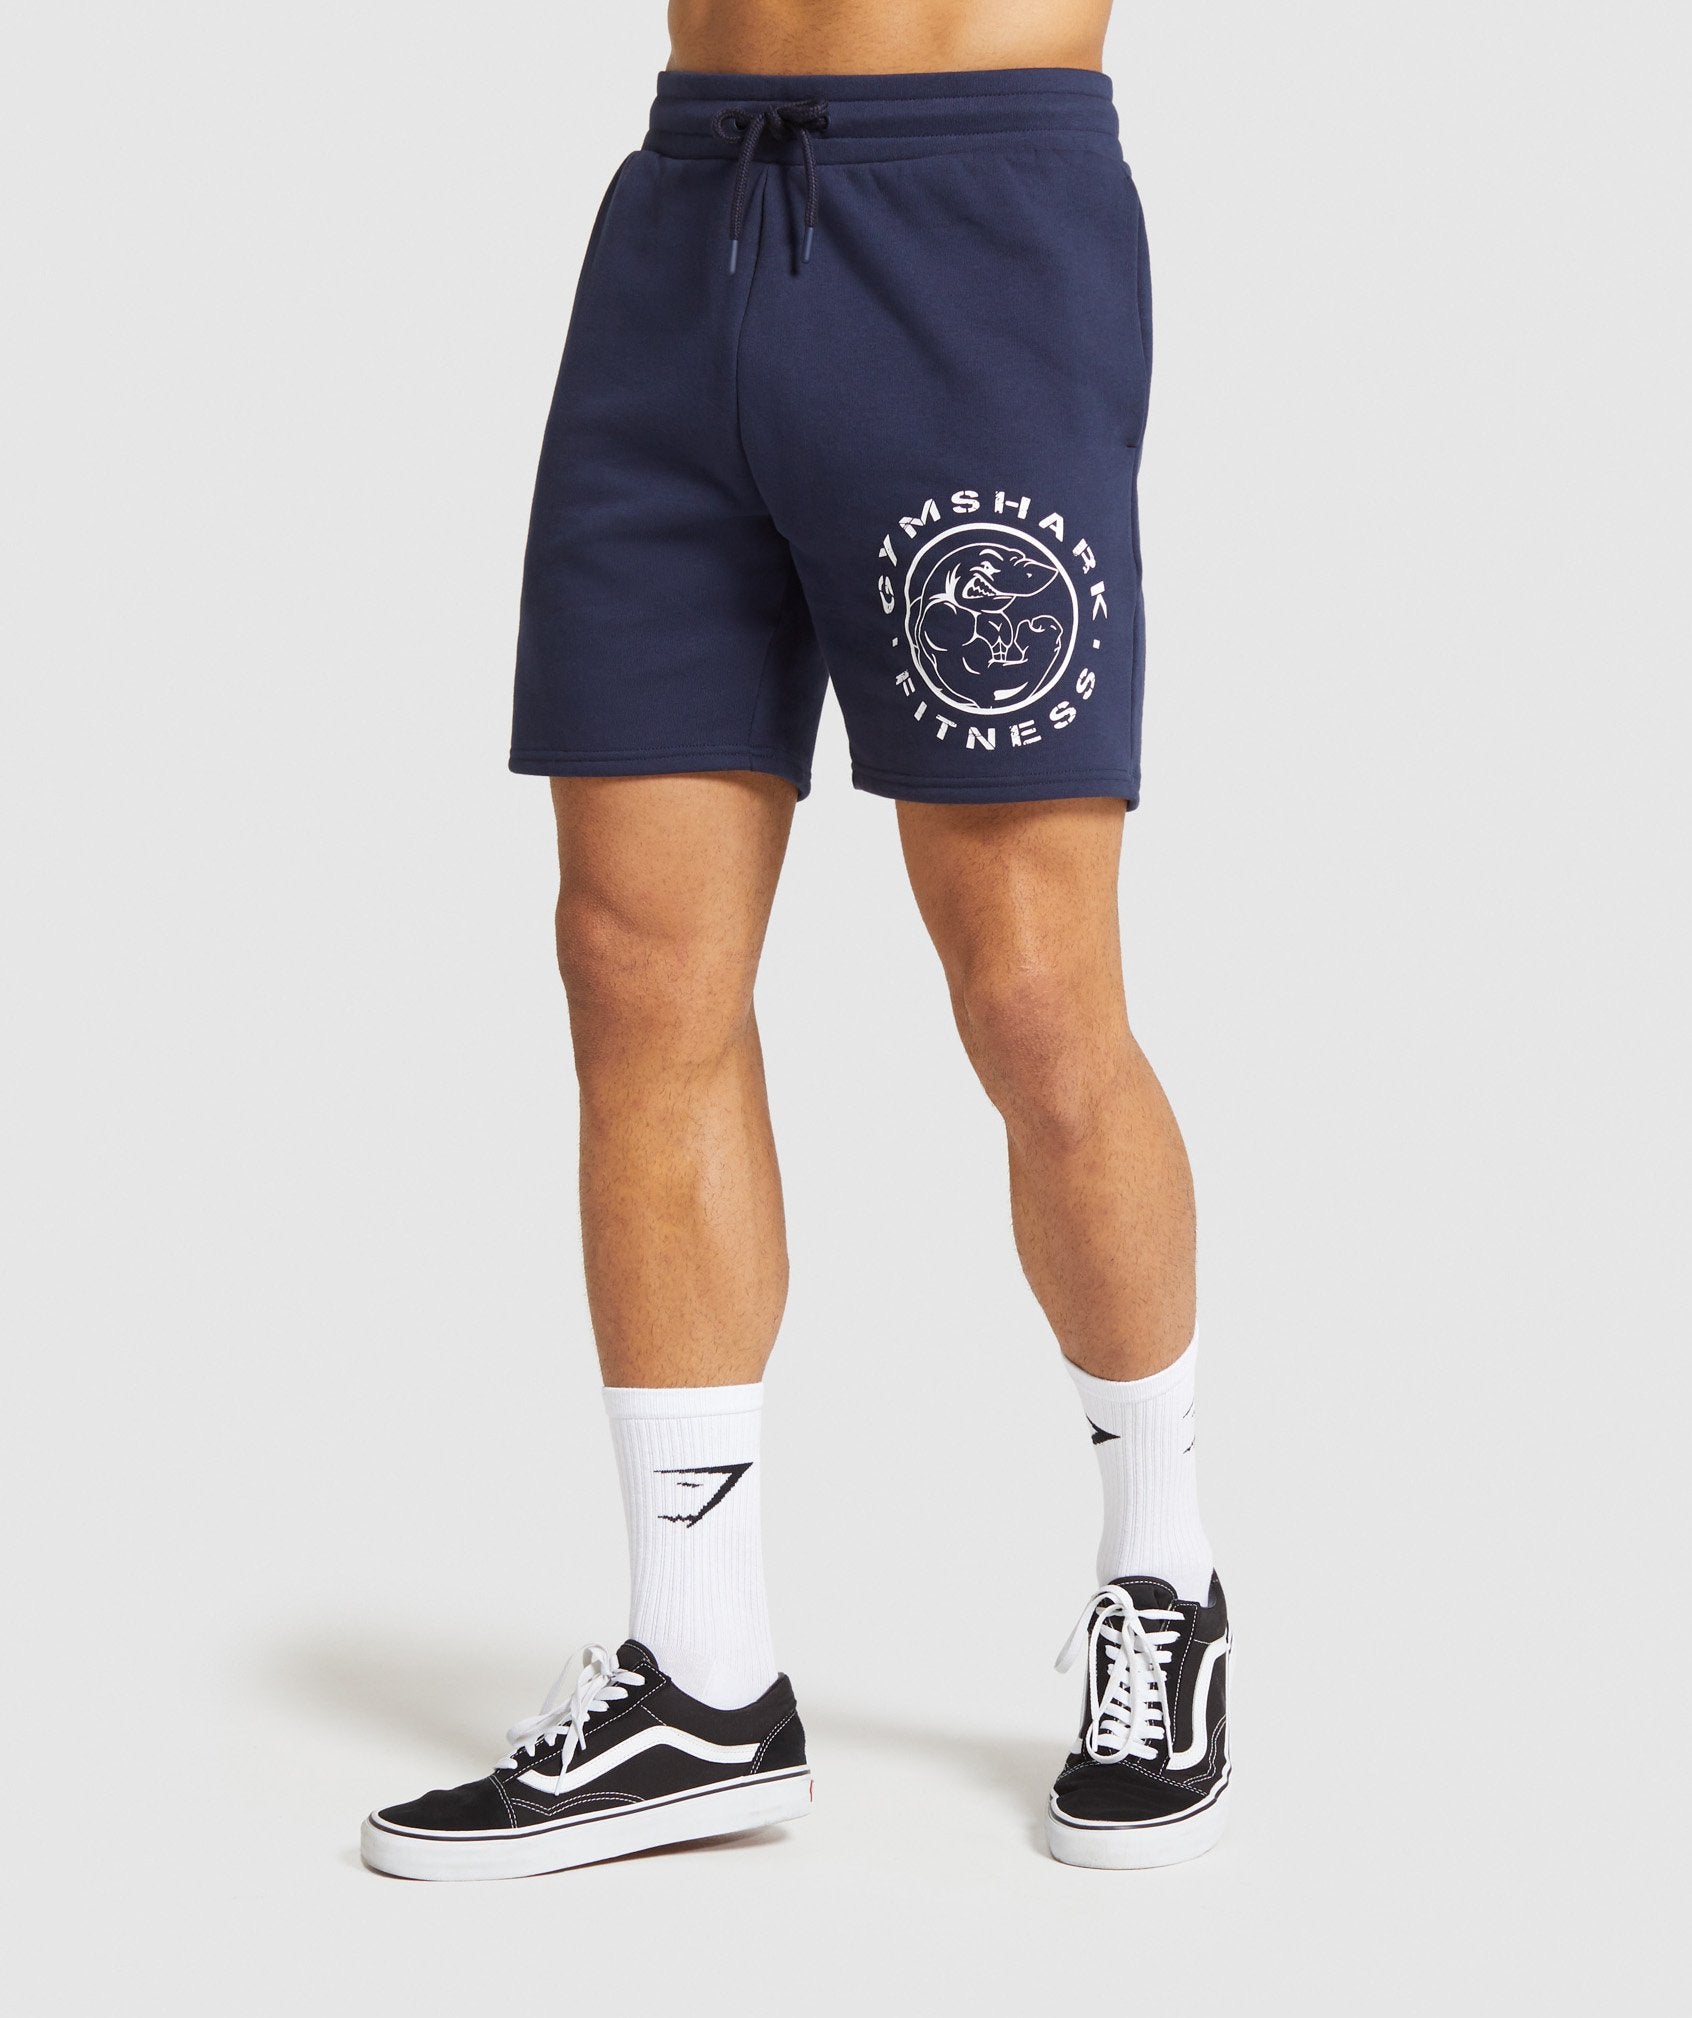 Legacy Shorts in Dark Blue - view 1